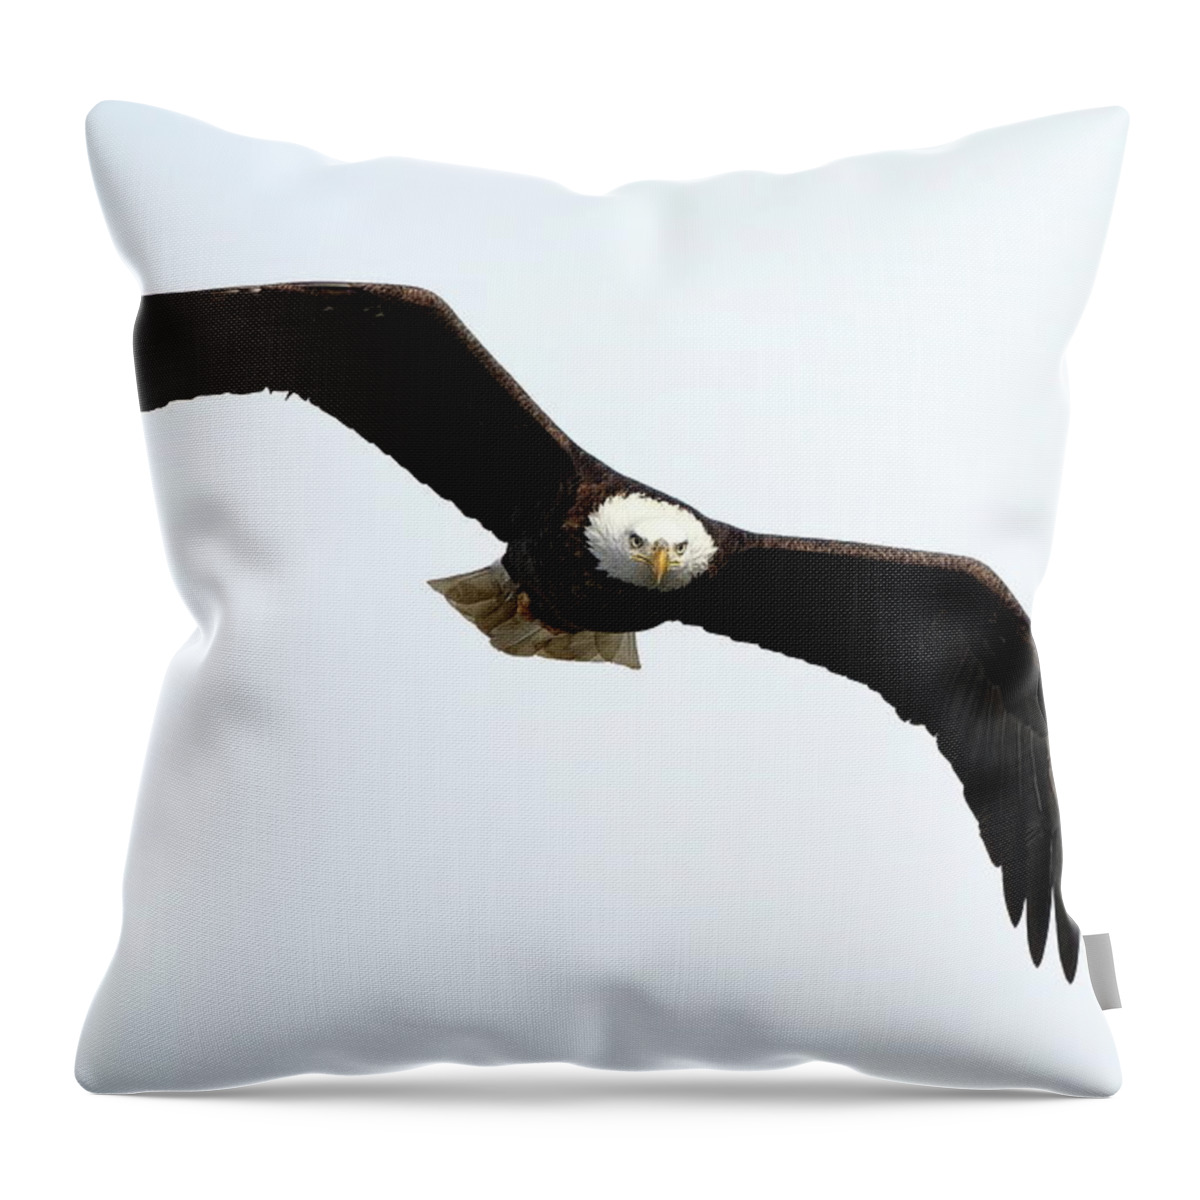 Bird Throw Pillow featuring the photograph Eyes On The Prize by Lens Art Photography By Larry Trager